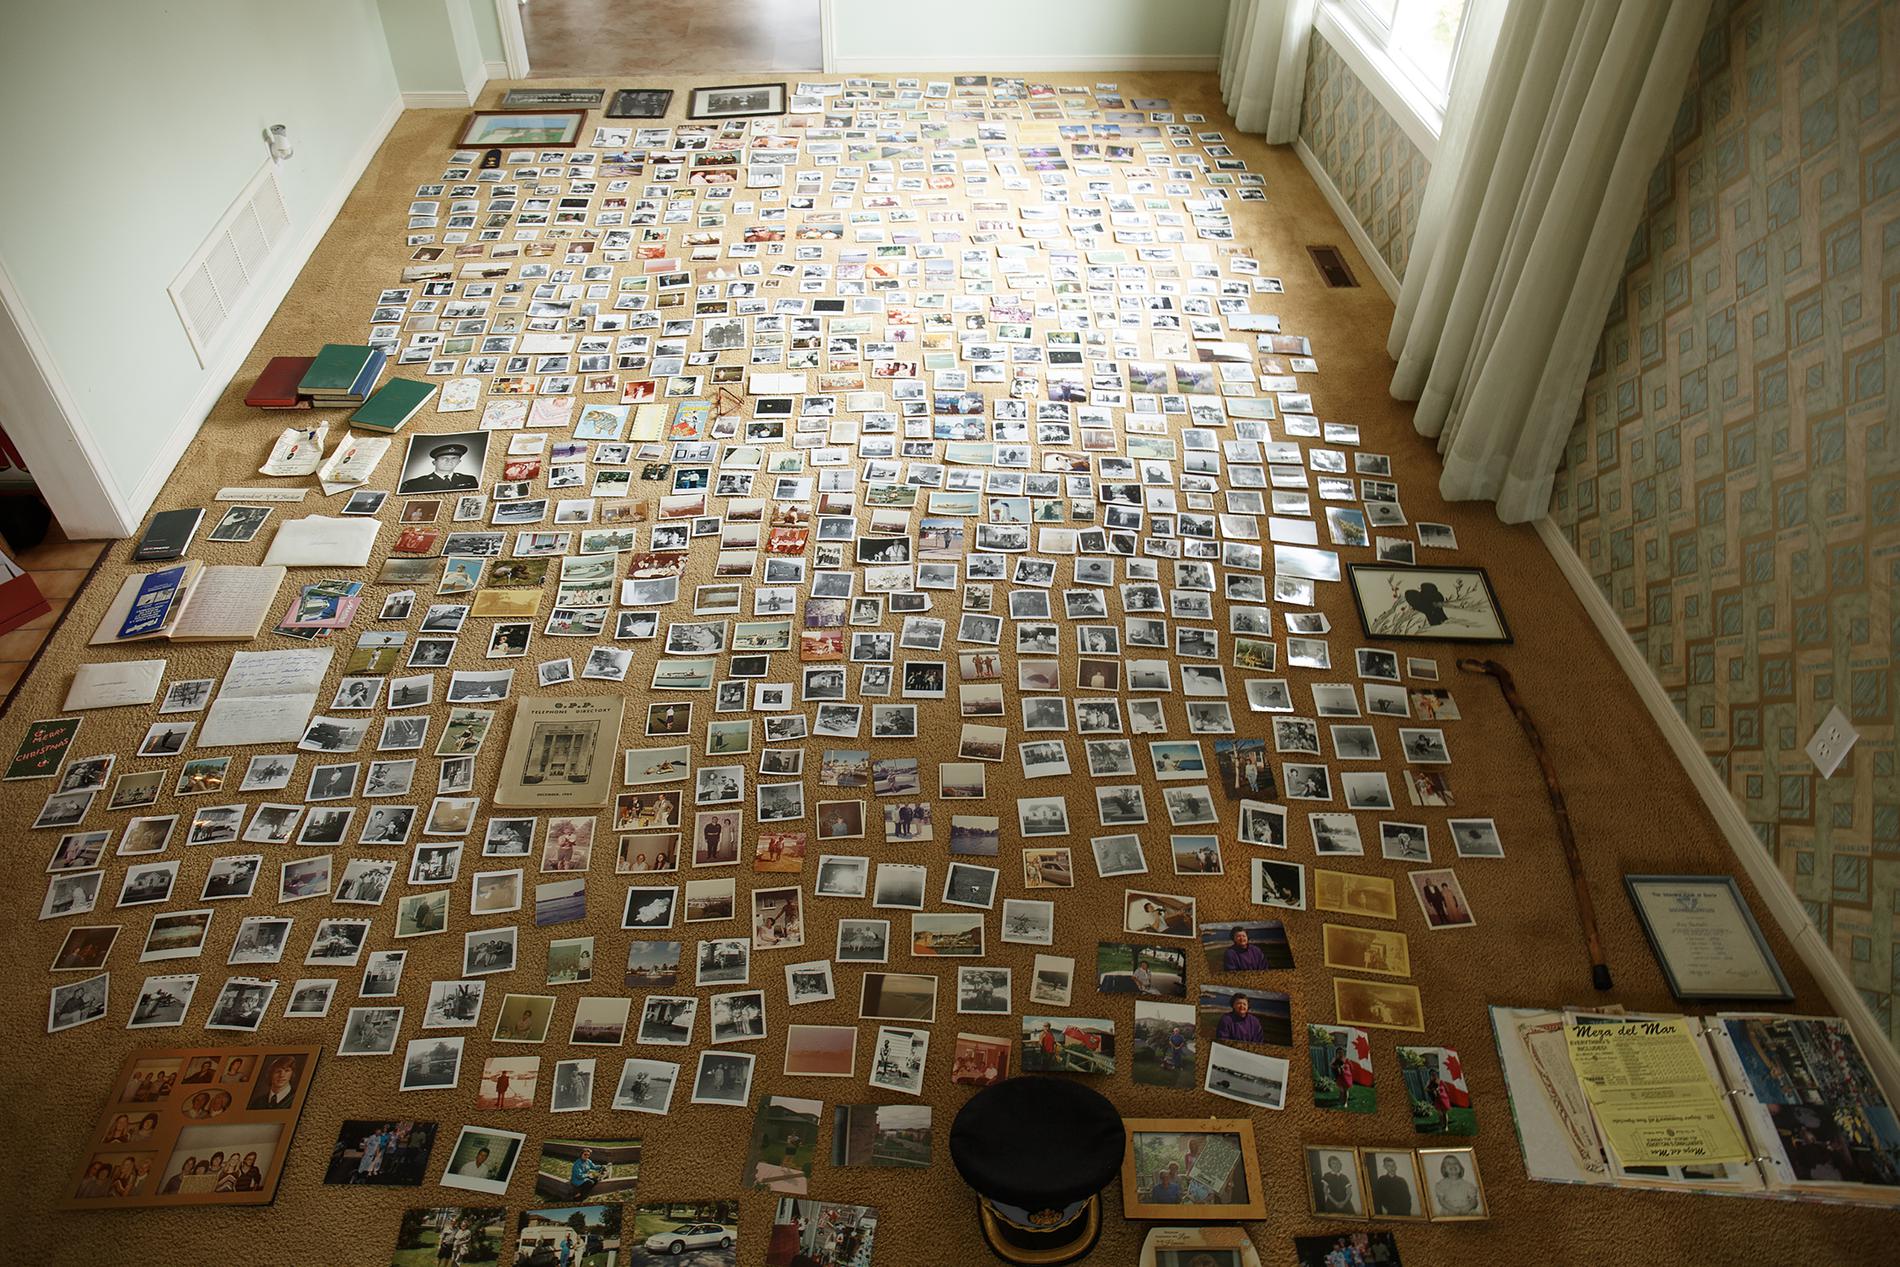 A carpeted room with photographs covering the entire floor.